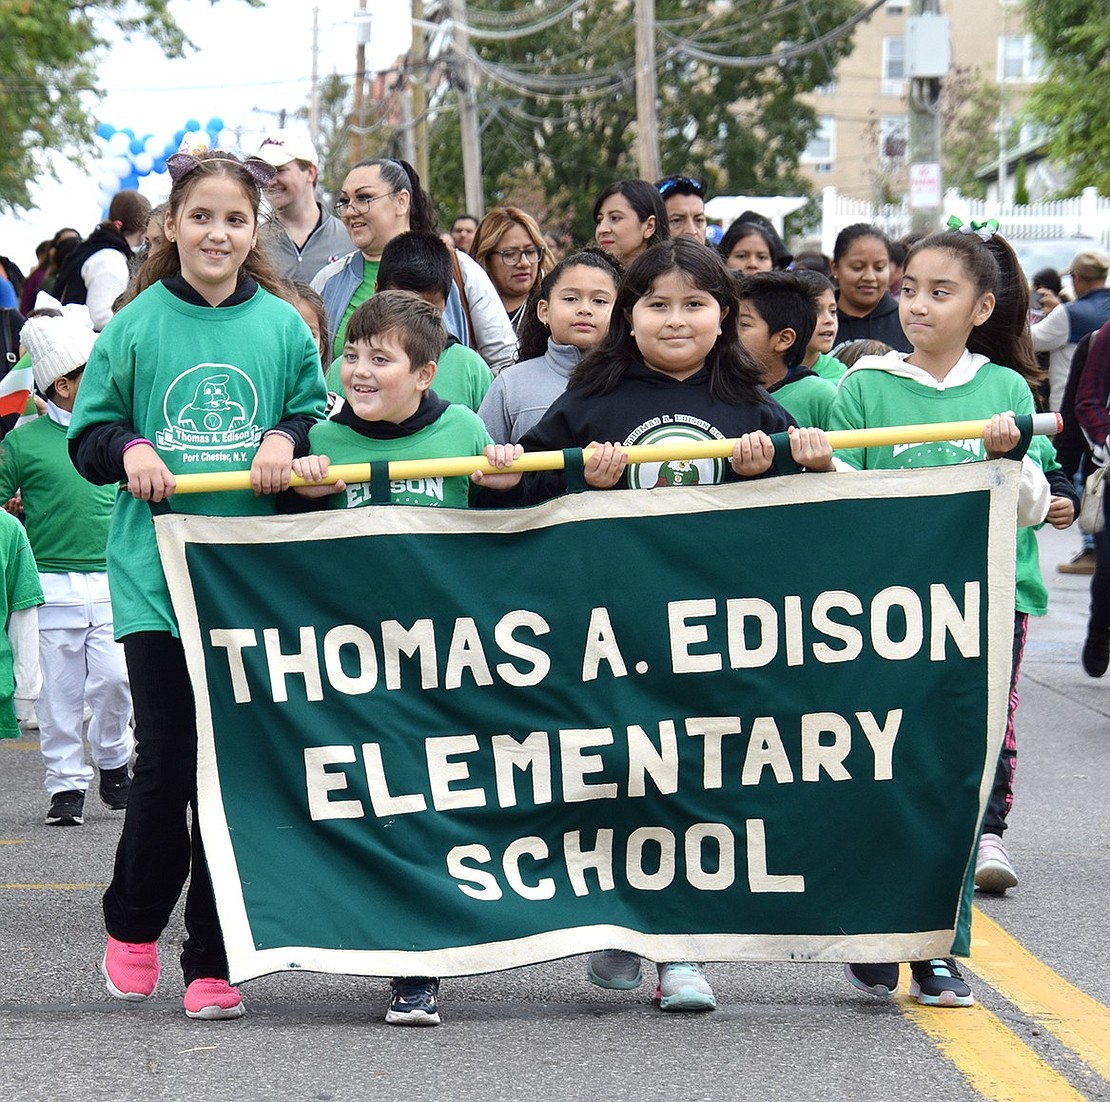 Edison School students proudly represent their school by working together to present the banner. From the left: fifth-grader Kathryn Melon, fifth-grader Luke Melon, fourth-grader Carla Zapata and third-grader Gianna Pesantez.